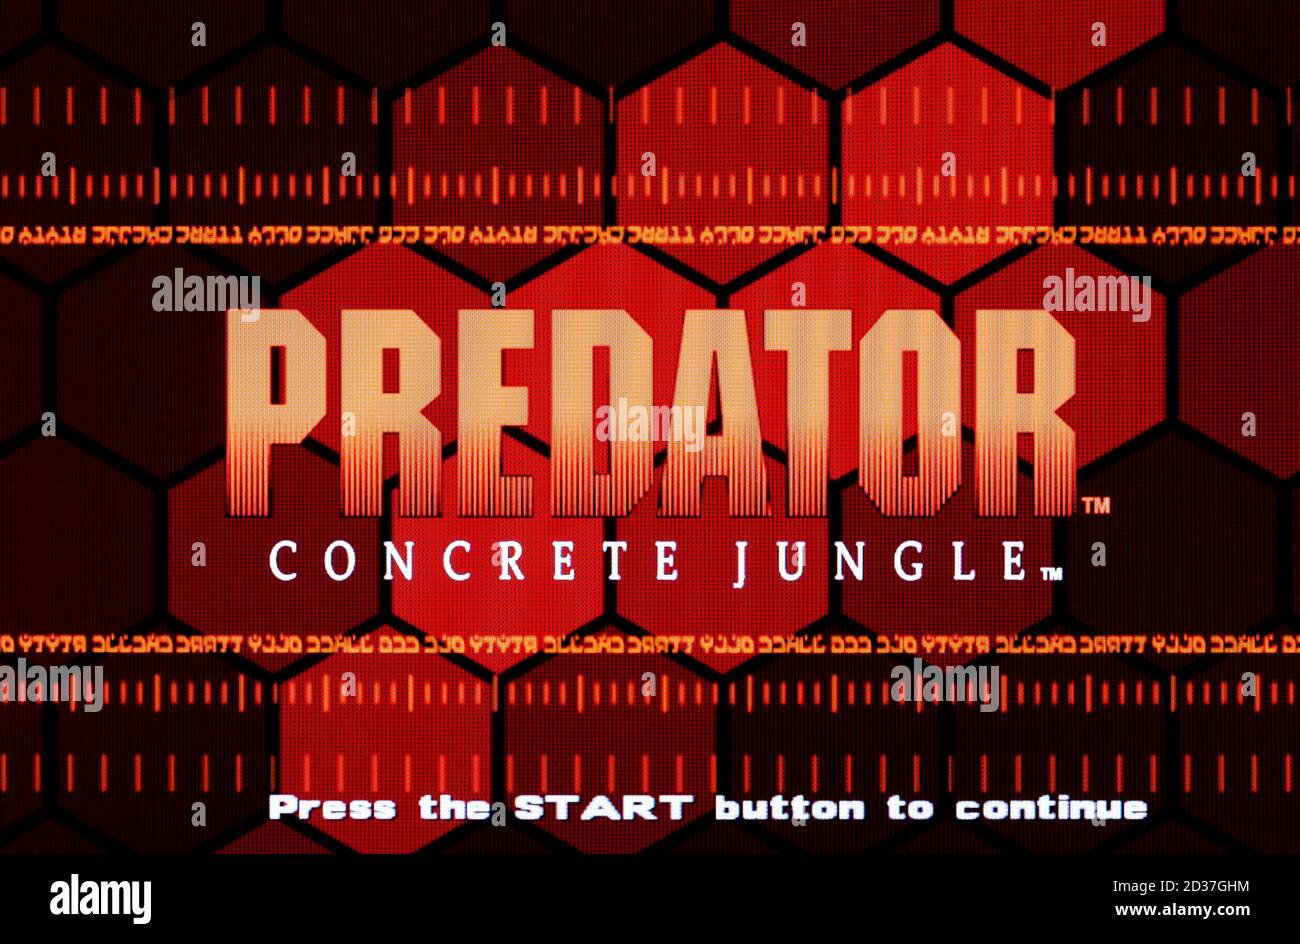 Predator - Concrete Jungle - Sony Playstation 2 PS2 - Editorial use only Stock Photo